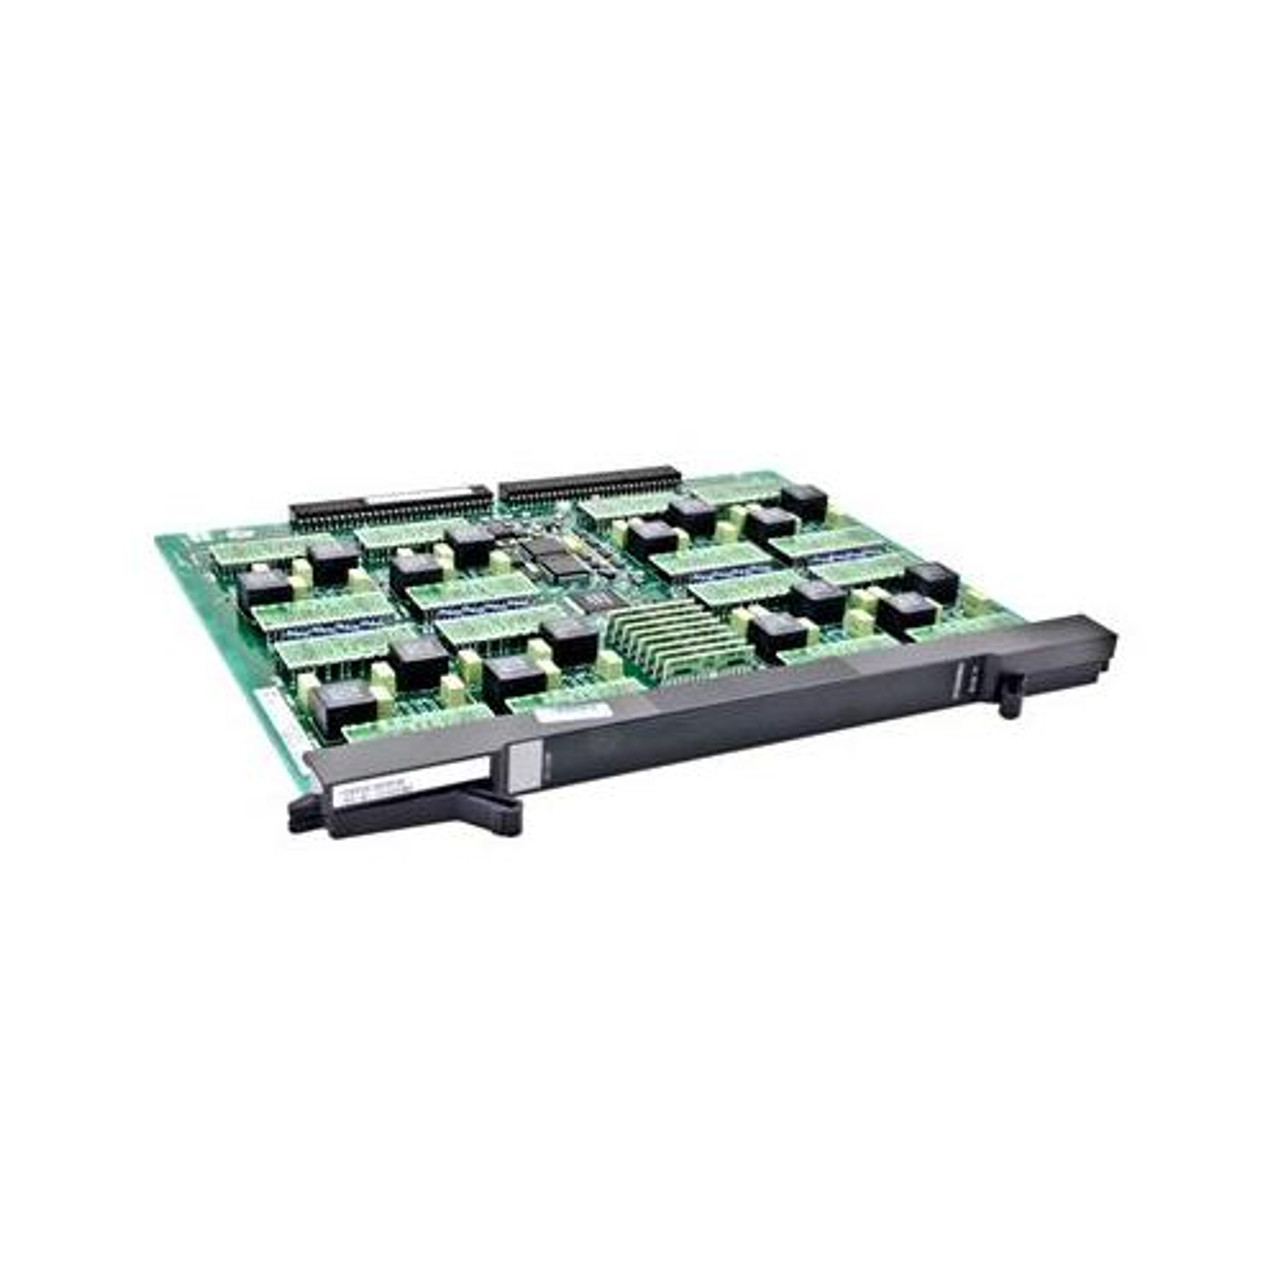 10GXFPLR Alcatel-Lucent 10 Gbps Small Form Factor Pluggable (XFP) 1 x XFP XFP (Refurbished)